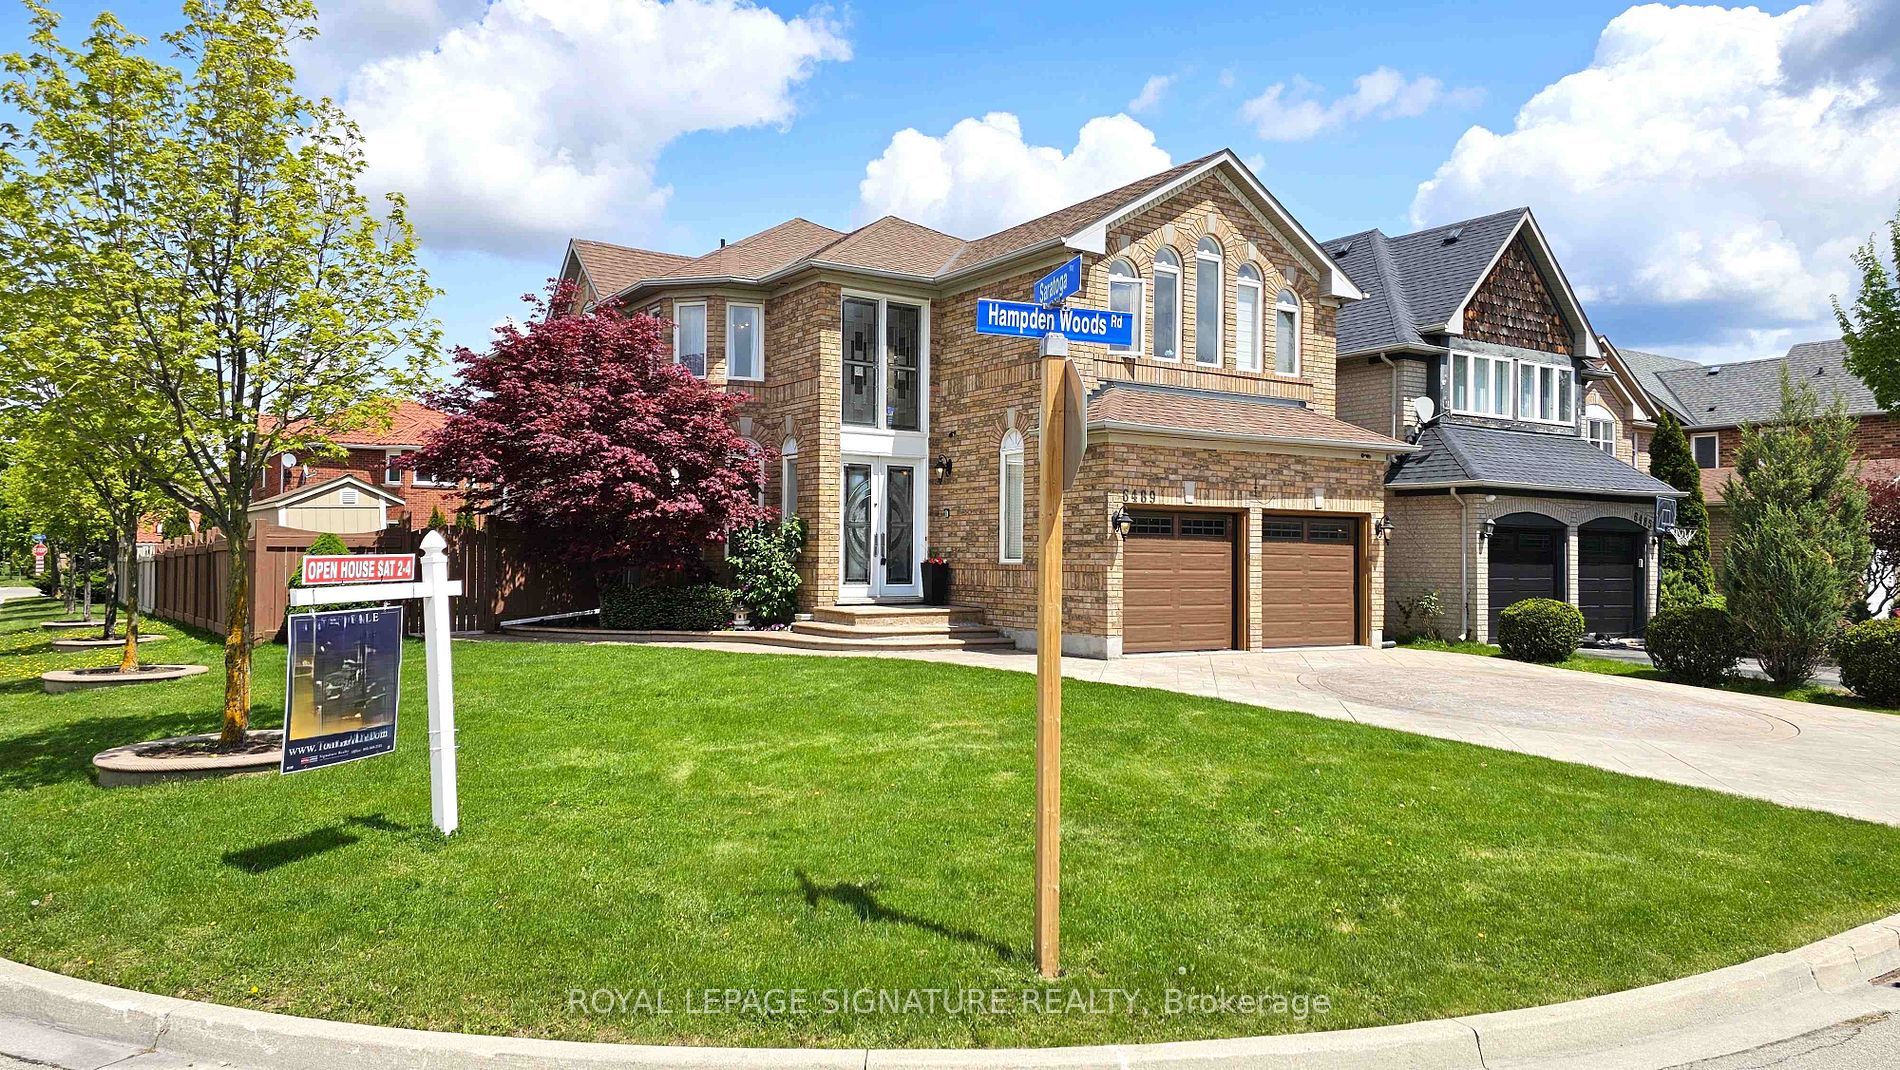 Detached house for sale at 6489 Hampden Woods Rd Mississauga Ontario